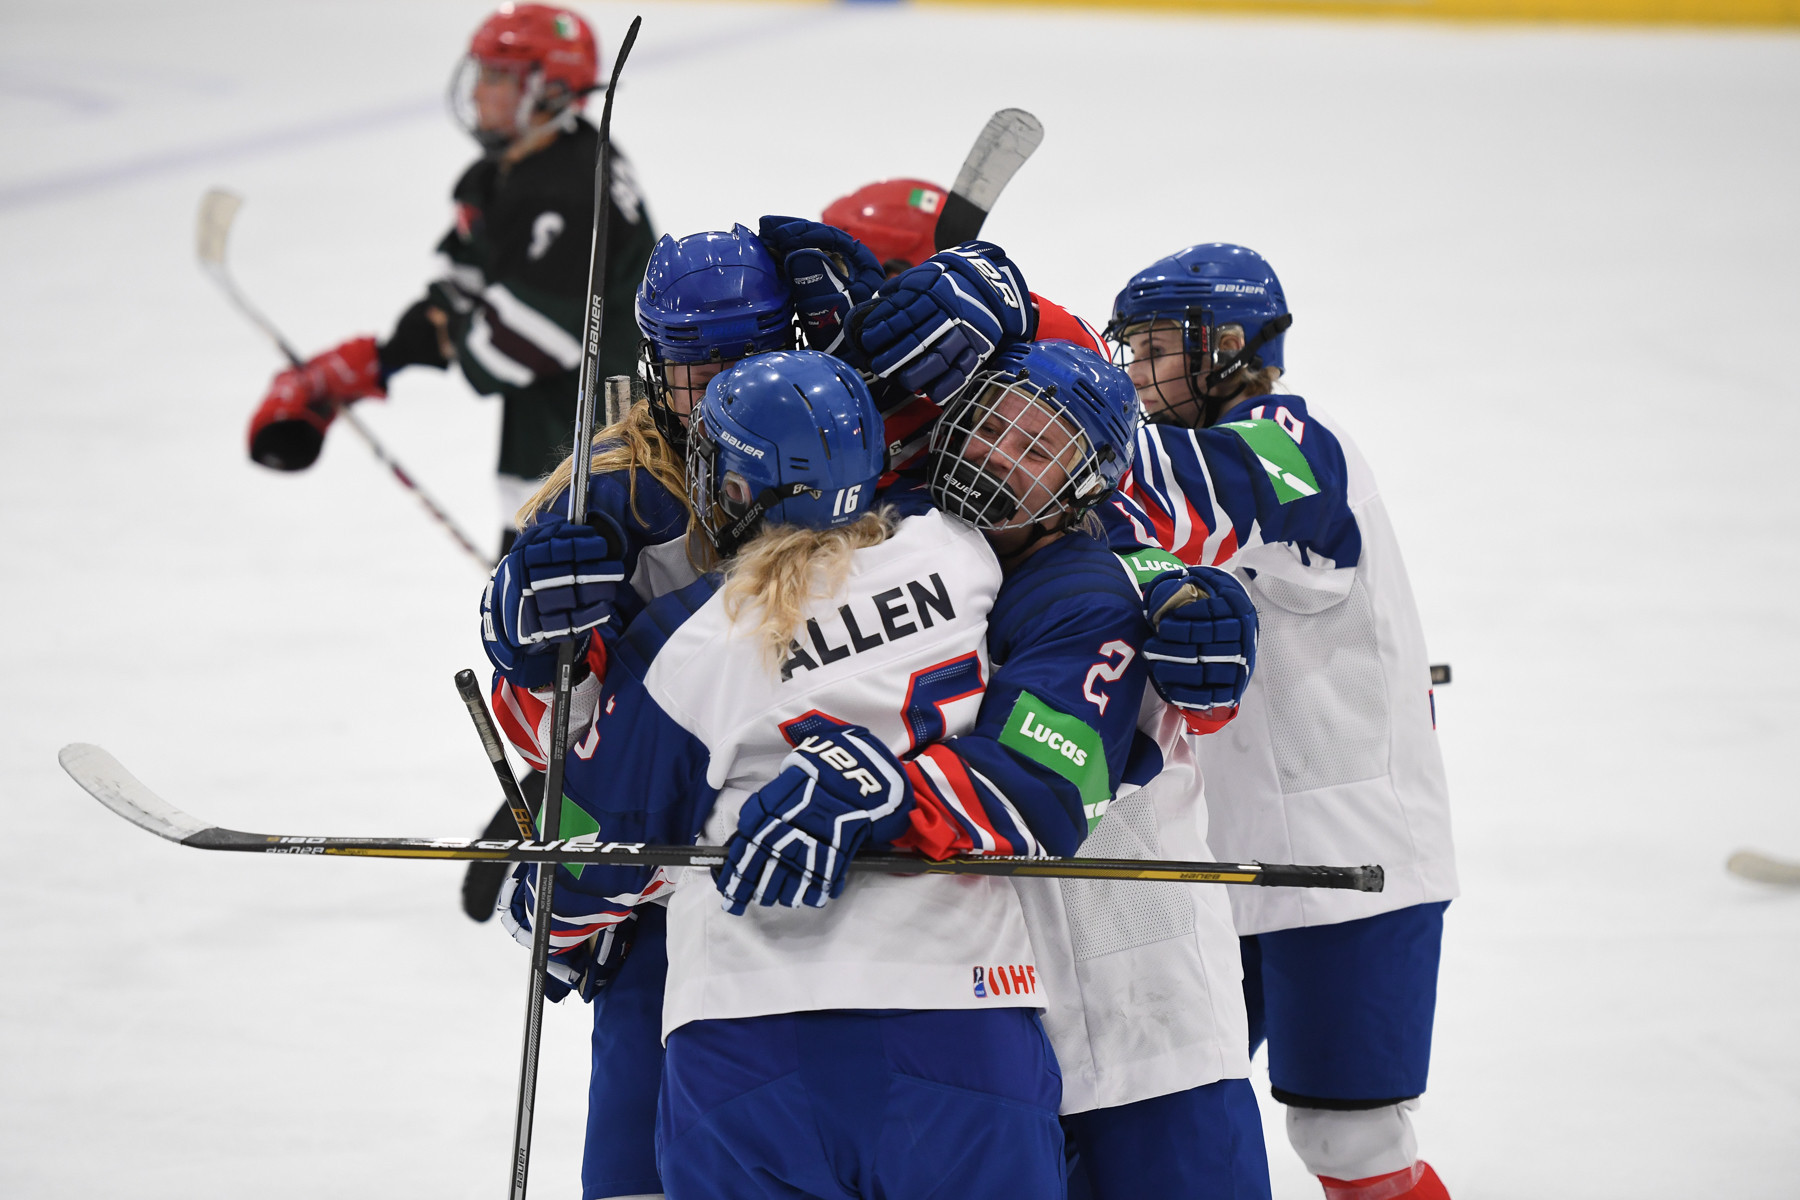 Britain has named its team for an event which has been cancelled because of the coronavirus ©Team GB Ice Hockey